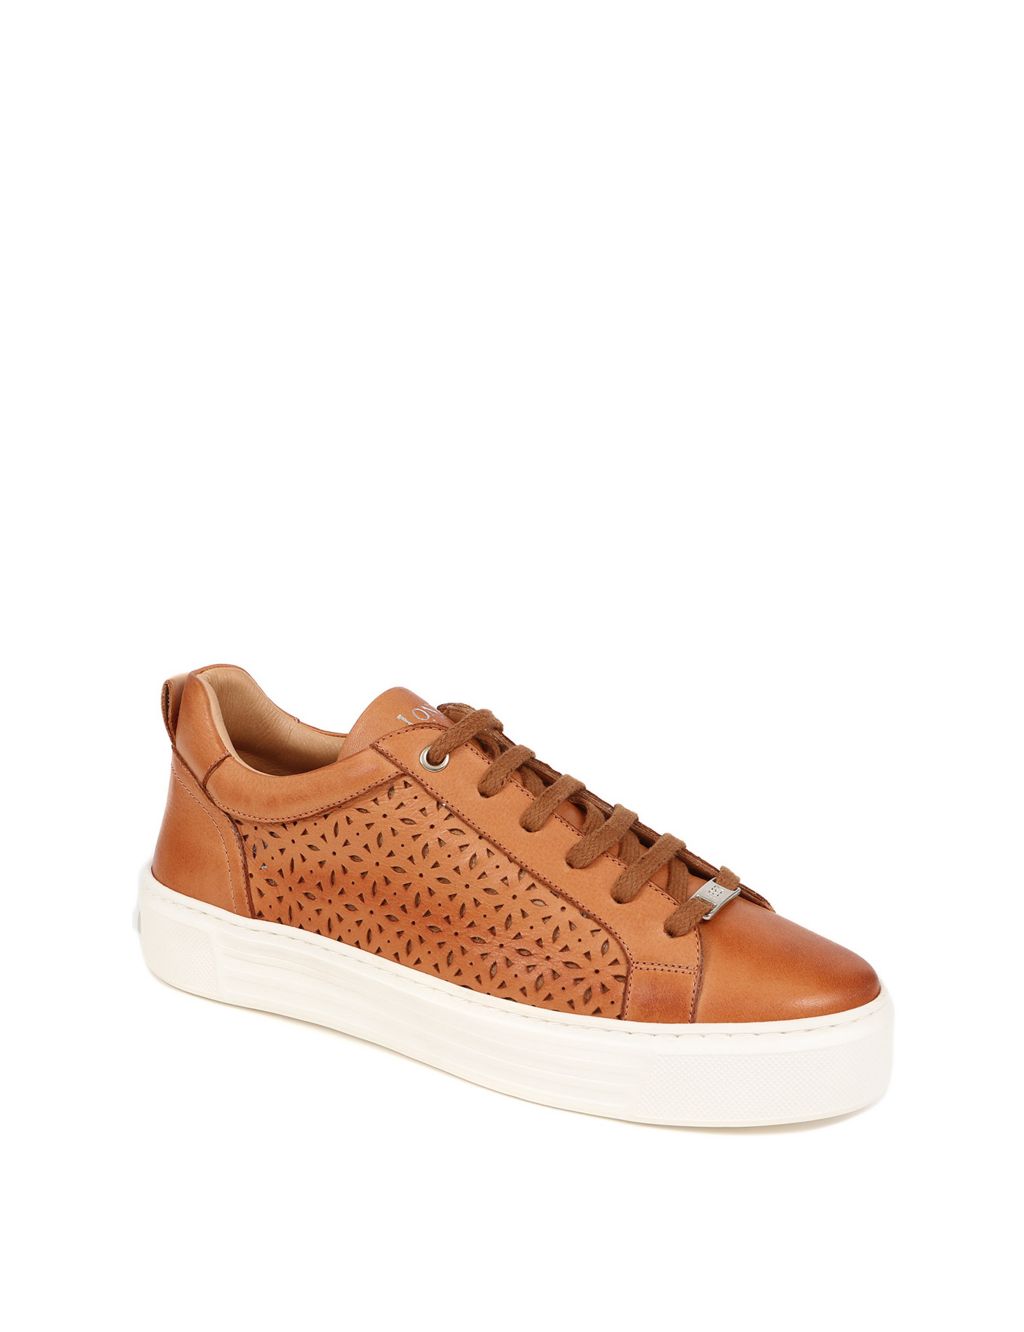 Leather Lace Up Perforated Flatform Trainers image 3